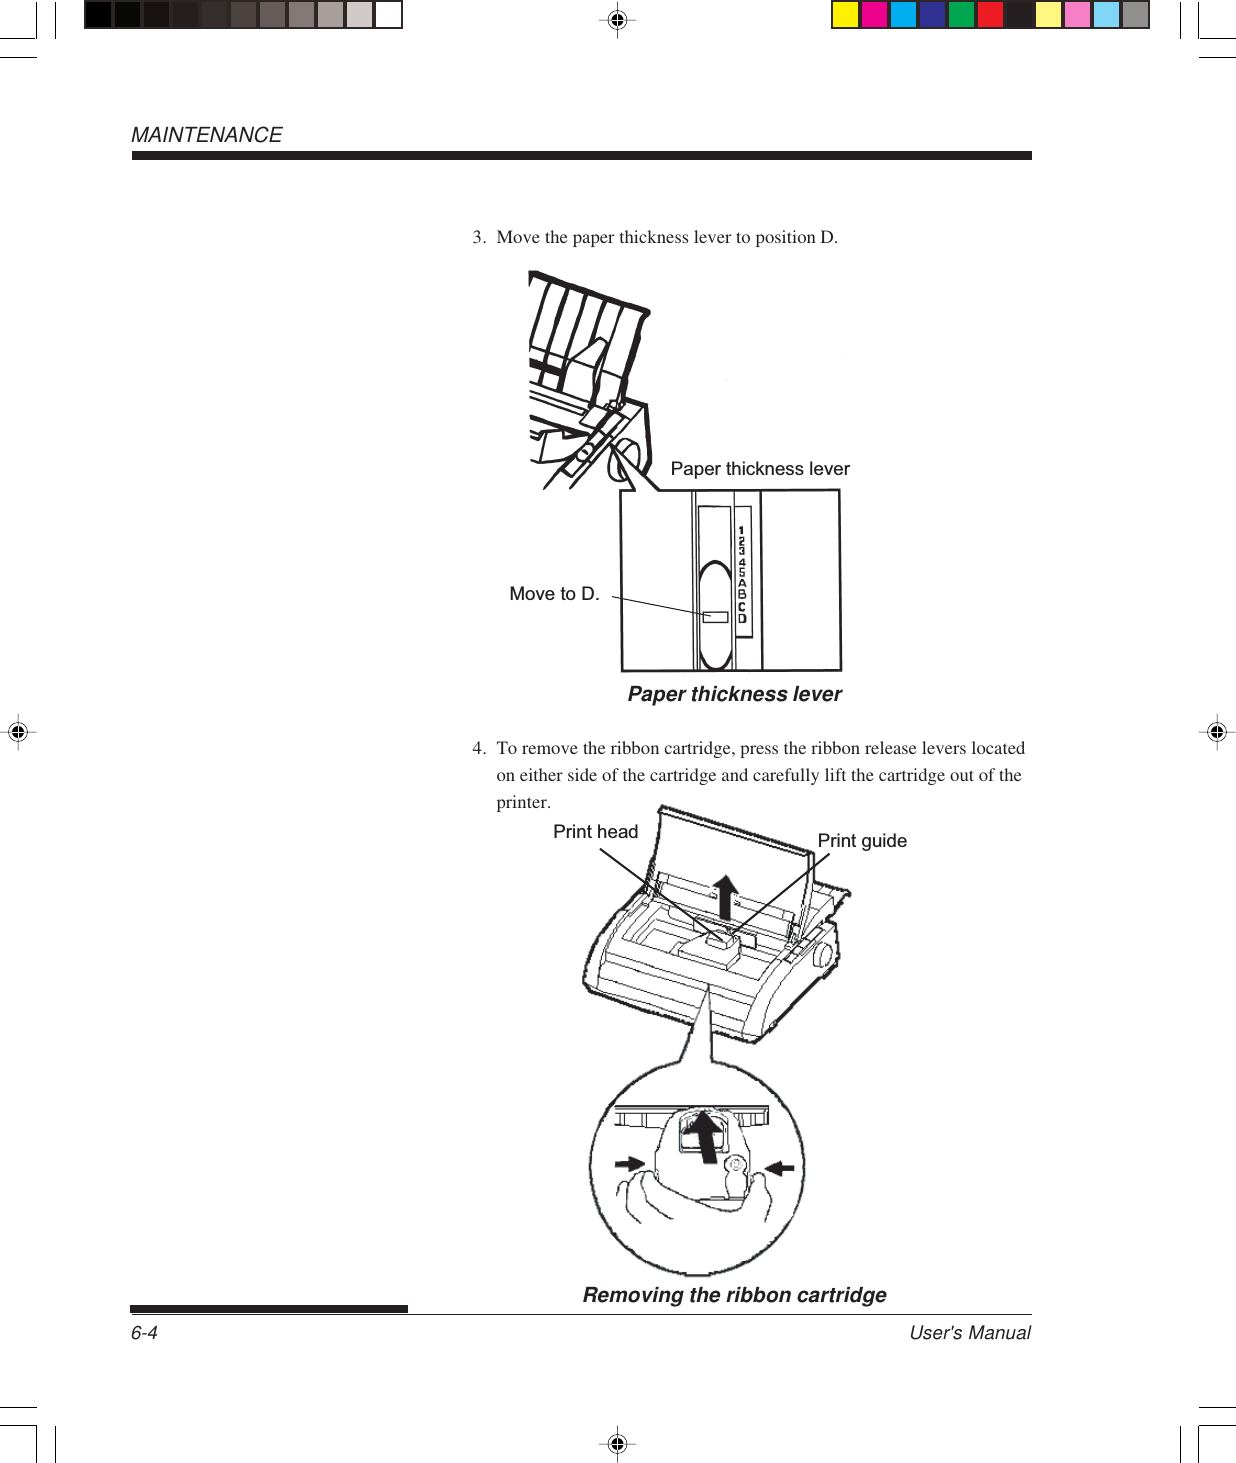 User&apos;s Manual6-4MAINTENANCERemoving the ribbon cartridgePrint guidePrint head3. Move the paper thickness lever to position D.Paper thickness lever4. To remove the ribbon cartridge, press the ribbon release levers locatedon either side of the cartridge and carefully lift the cartridge out of theprinter.Paper thickness leverMove to D.